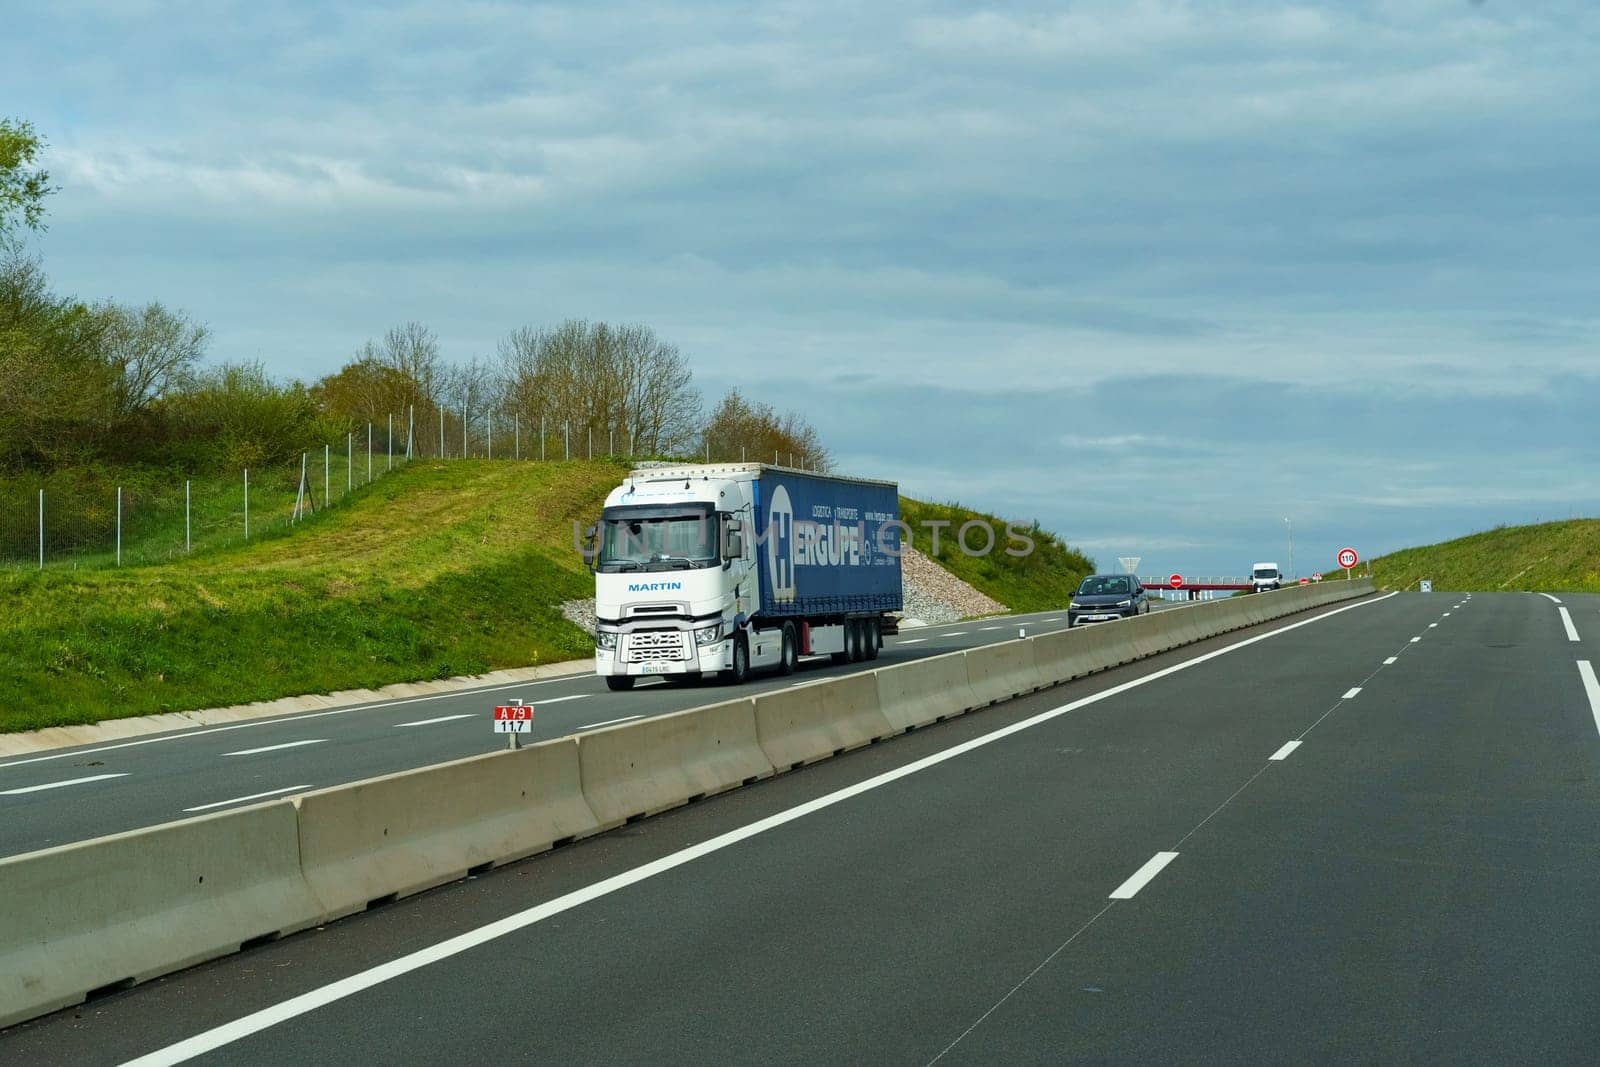 Bordeaux, France - April 26, 2023: A commercial truck is driving down a highway that runs alongside a vibrant green hillside on a sunny day.